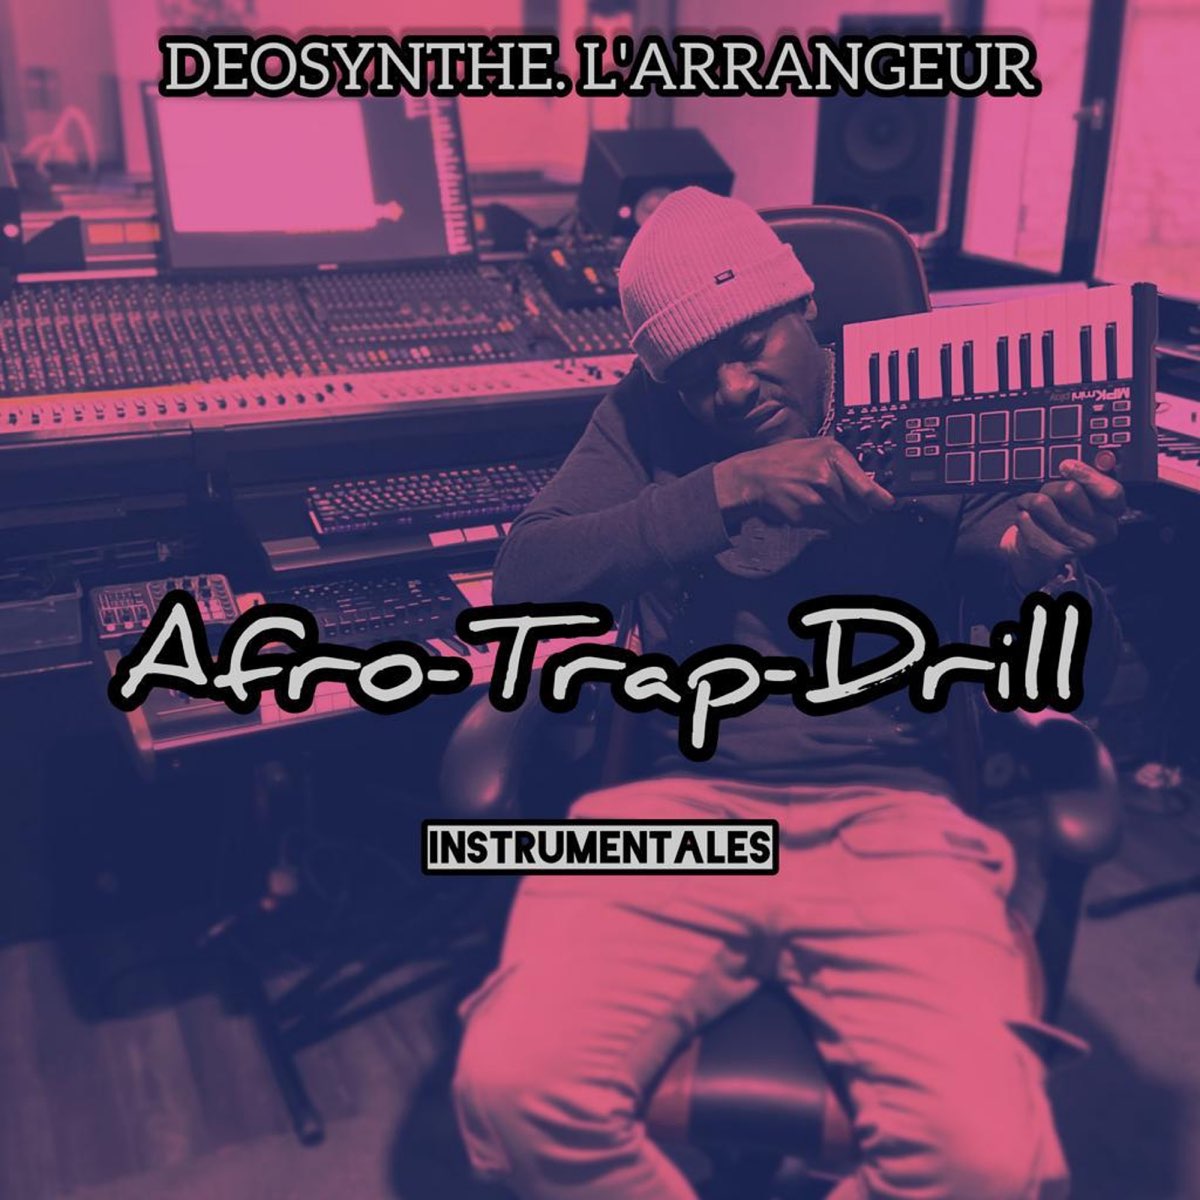 Instrumental Afro Trap Drill 1 - EP - Album by Deosynthe l'arrangeur -  Apple Music